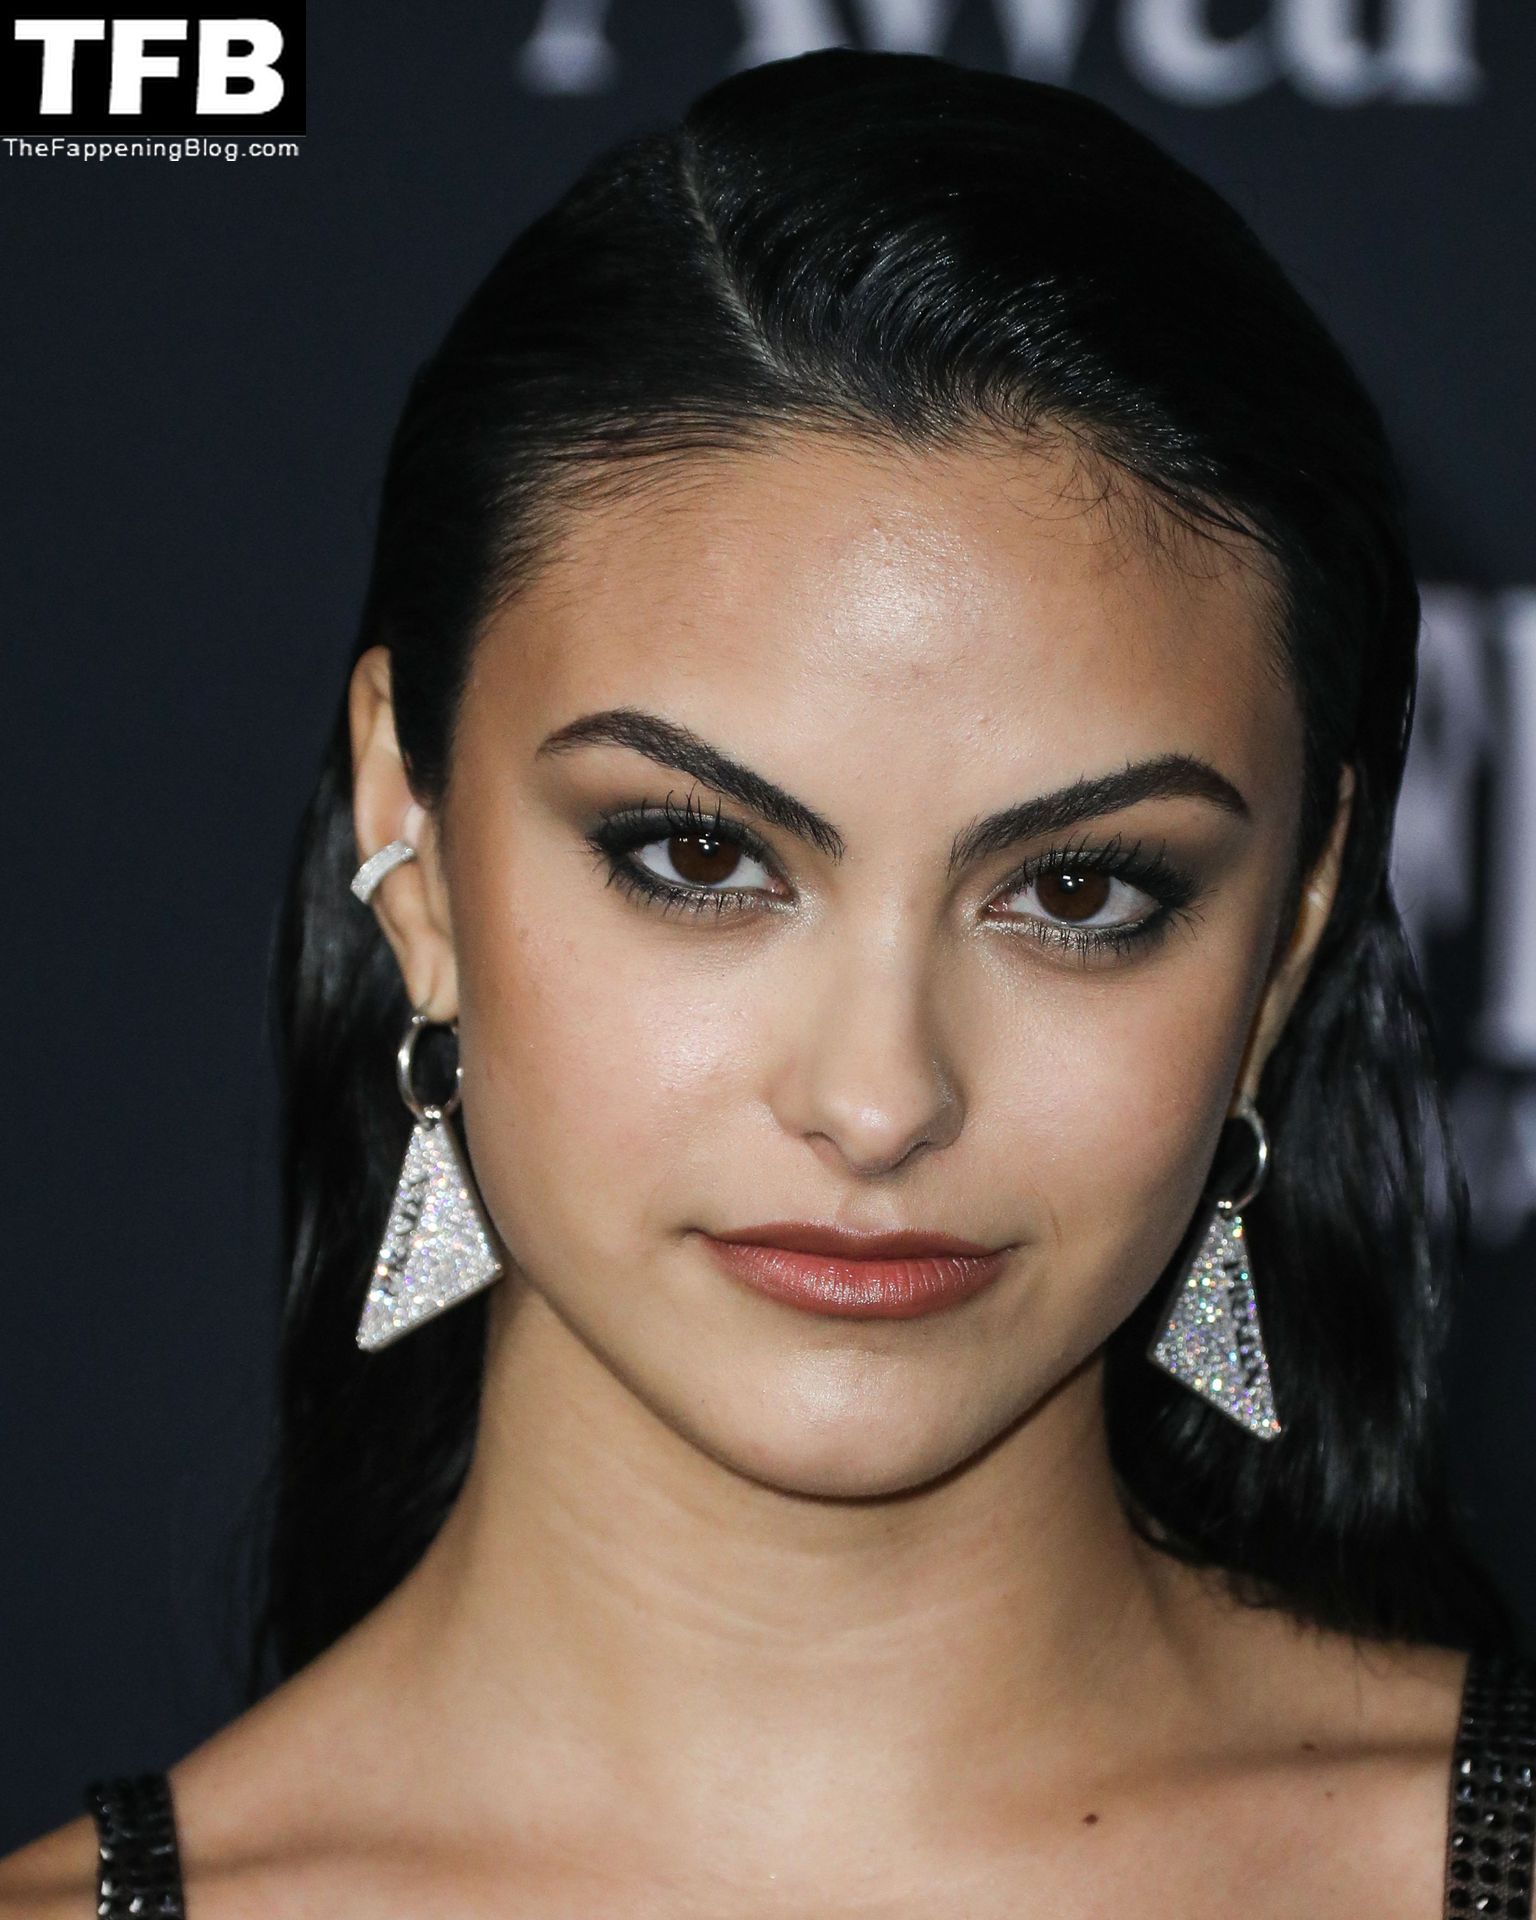 Camila-Mendes-See-Through-Tits-The-Fappening-Blog-3.jpg